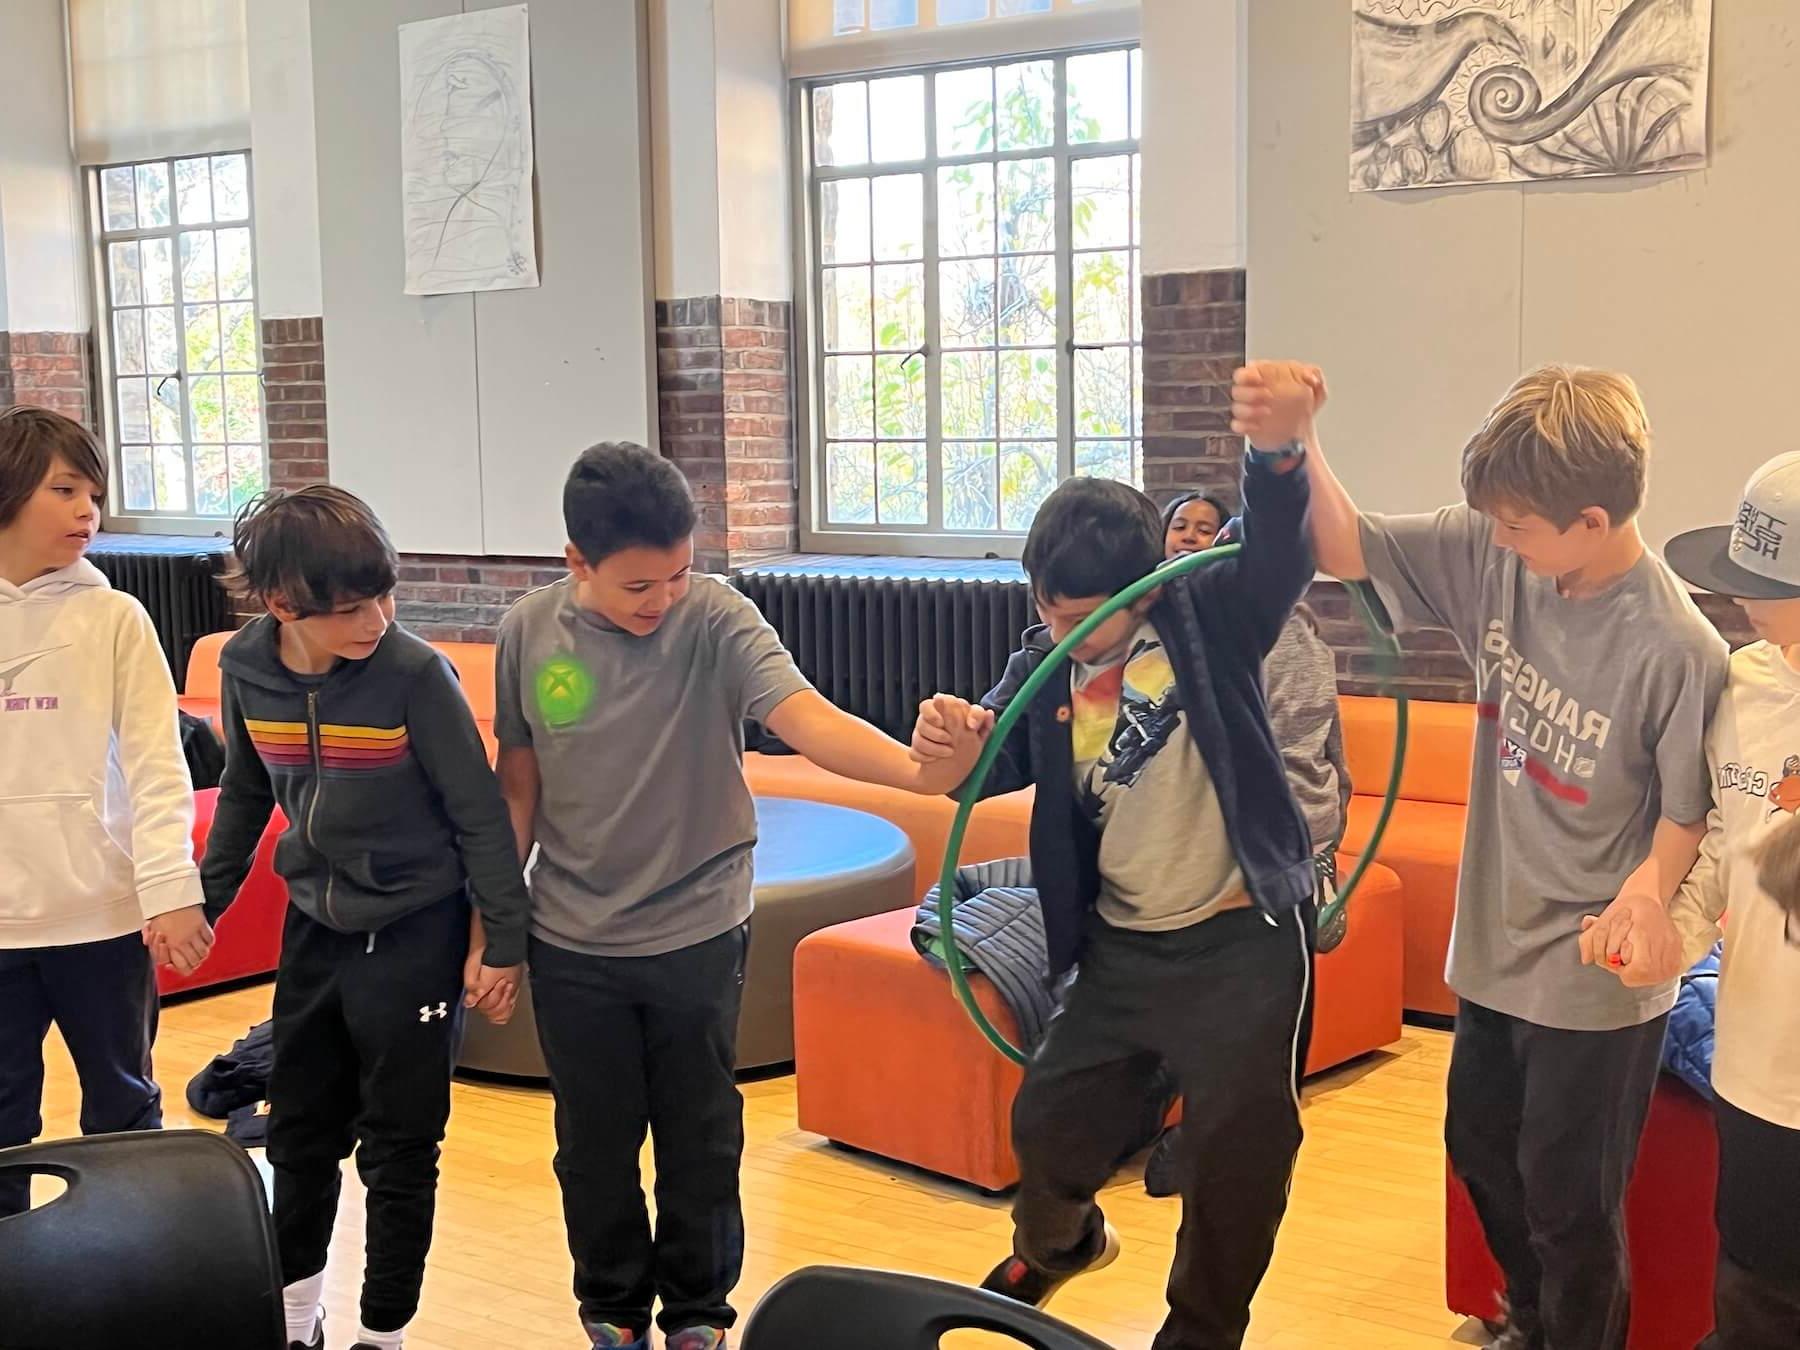 Ethical Culture Fieldston School Fieldston Lower students participating in team building activity by passing a hola hoop around a circle